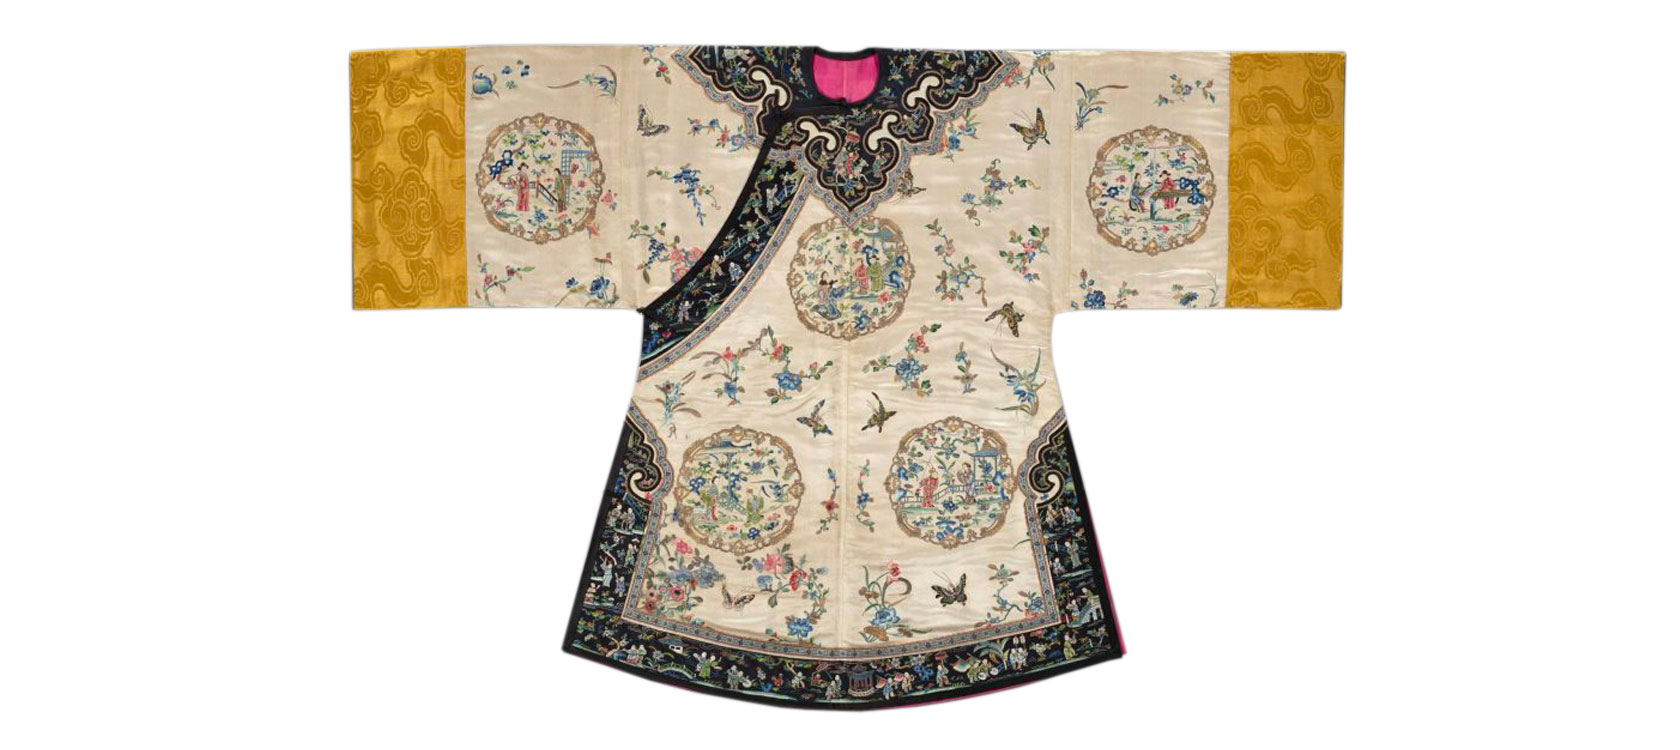 Lady’s Coat Embroidered with Theater Images, China, mid-19th century, Qing Dynasty (1644–1911). Embroidered satin, 42 inches (106.68 cm). The Nelson-Atkins Museum of Art, Kansas City, Missouri. Gift of Adela Van Horn, 45-34.